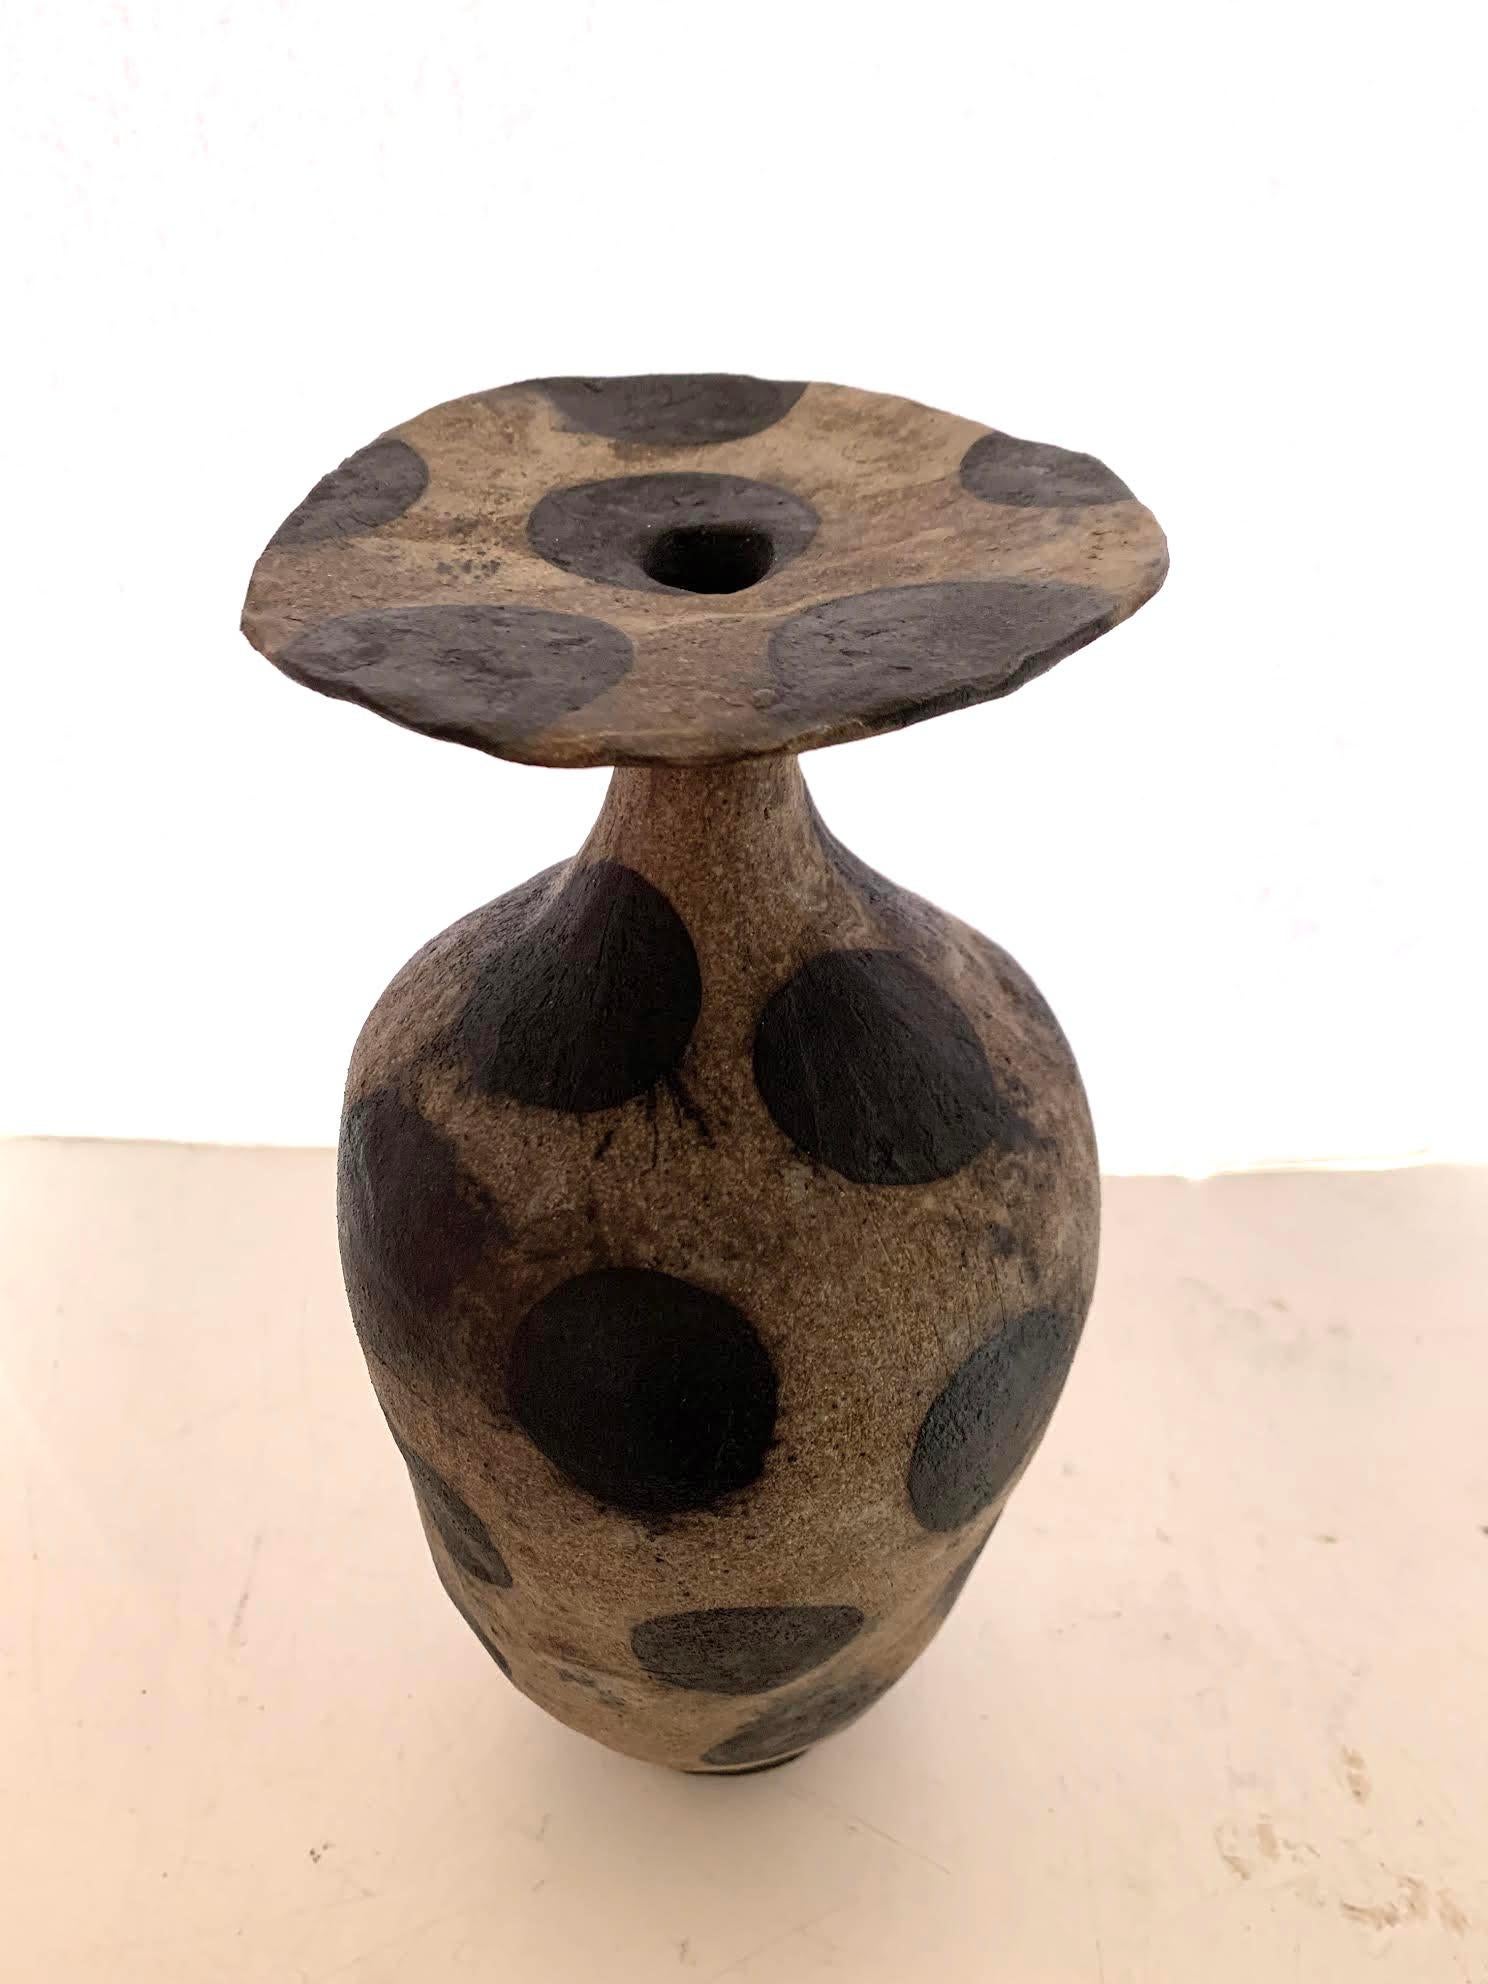 Contemporary American ceramicist Brenda Holzke made unique one of a kind ceramic vase that is hand built and made of various colors. 
Recycled stoneware clay with iron oxide stain dots.
Decorative large black polka dots on a light brown base.
